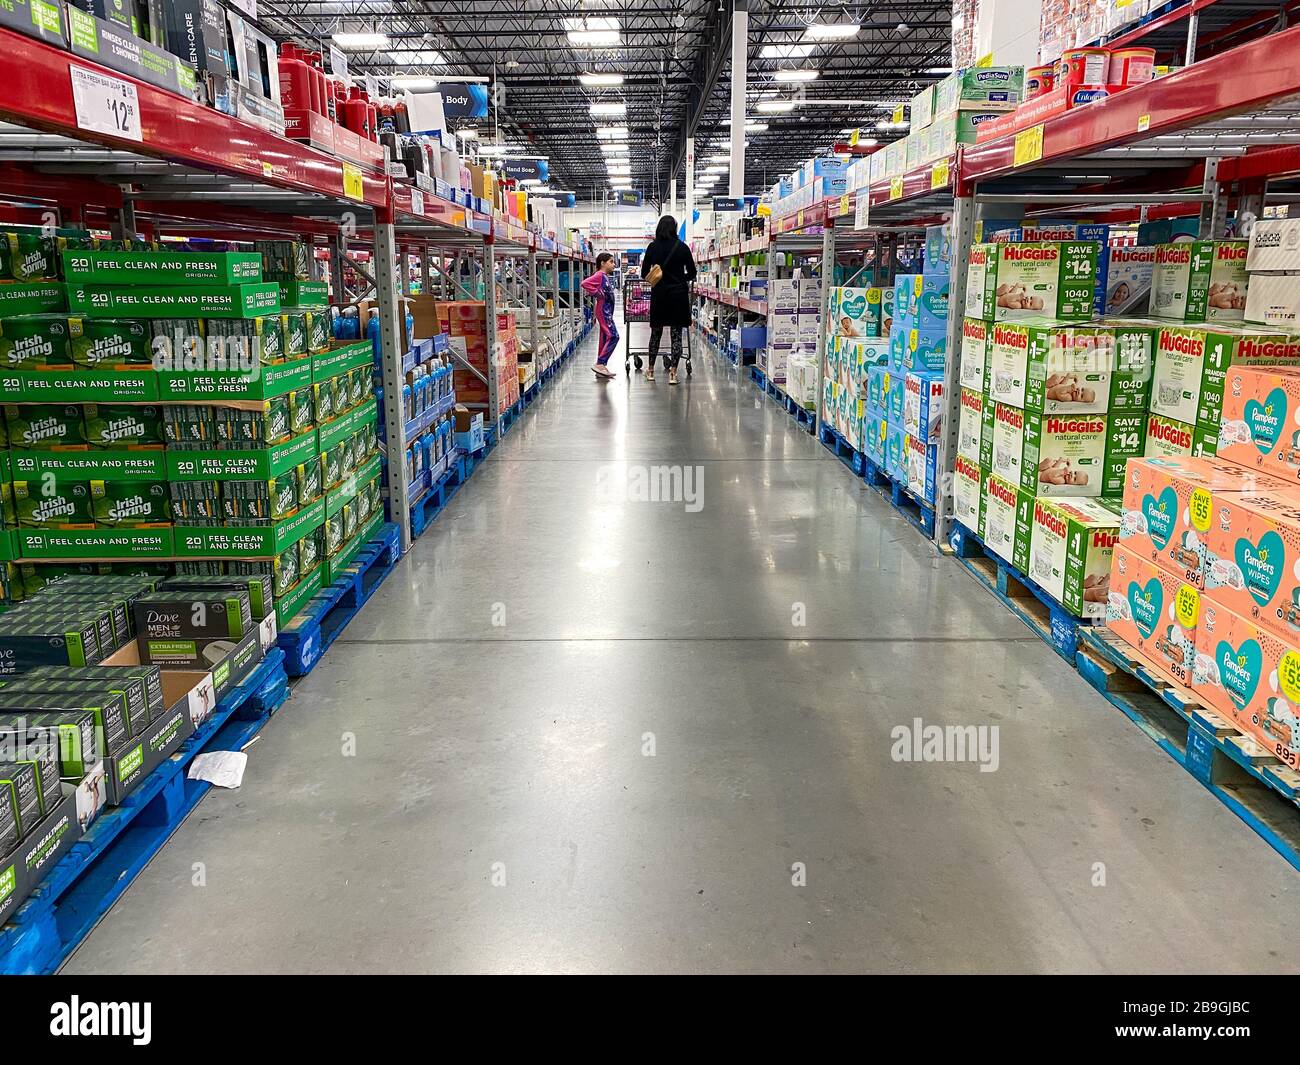 Orlando,FL/USA - 3/7/20: The body soap and baby aisle at a Sams Club  wholesale retail store Stock Photo - Alamy